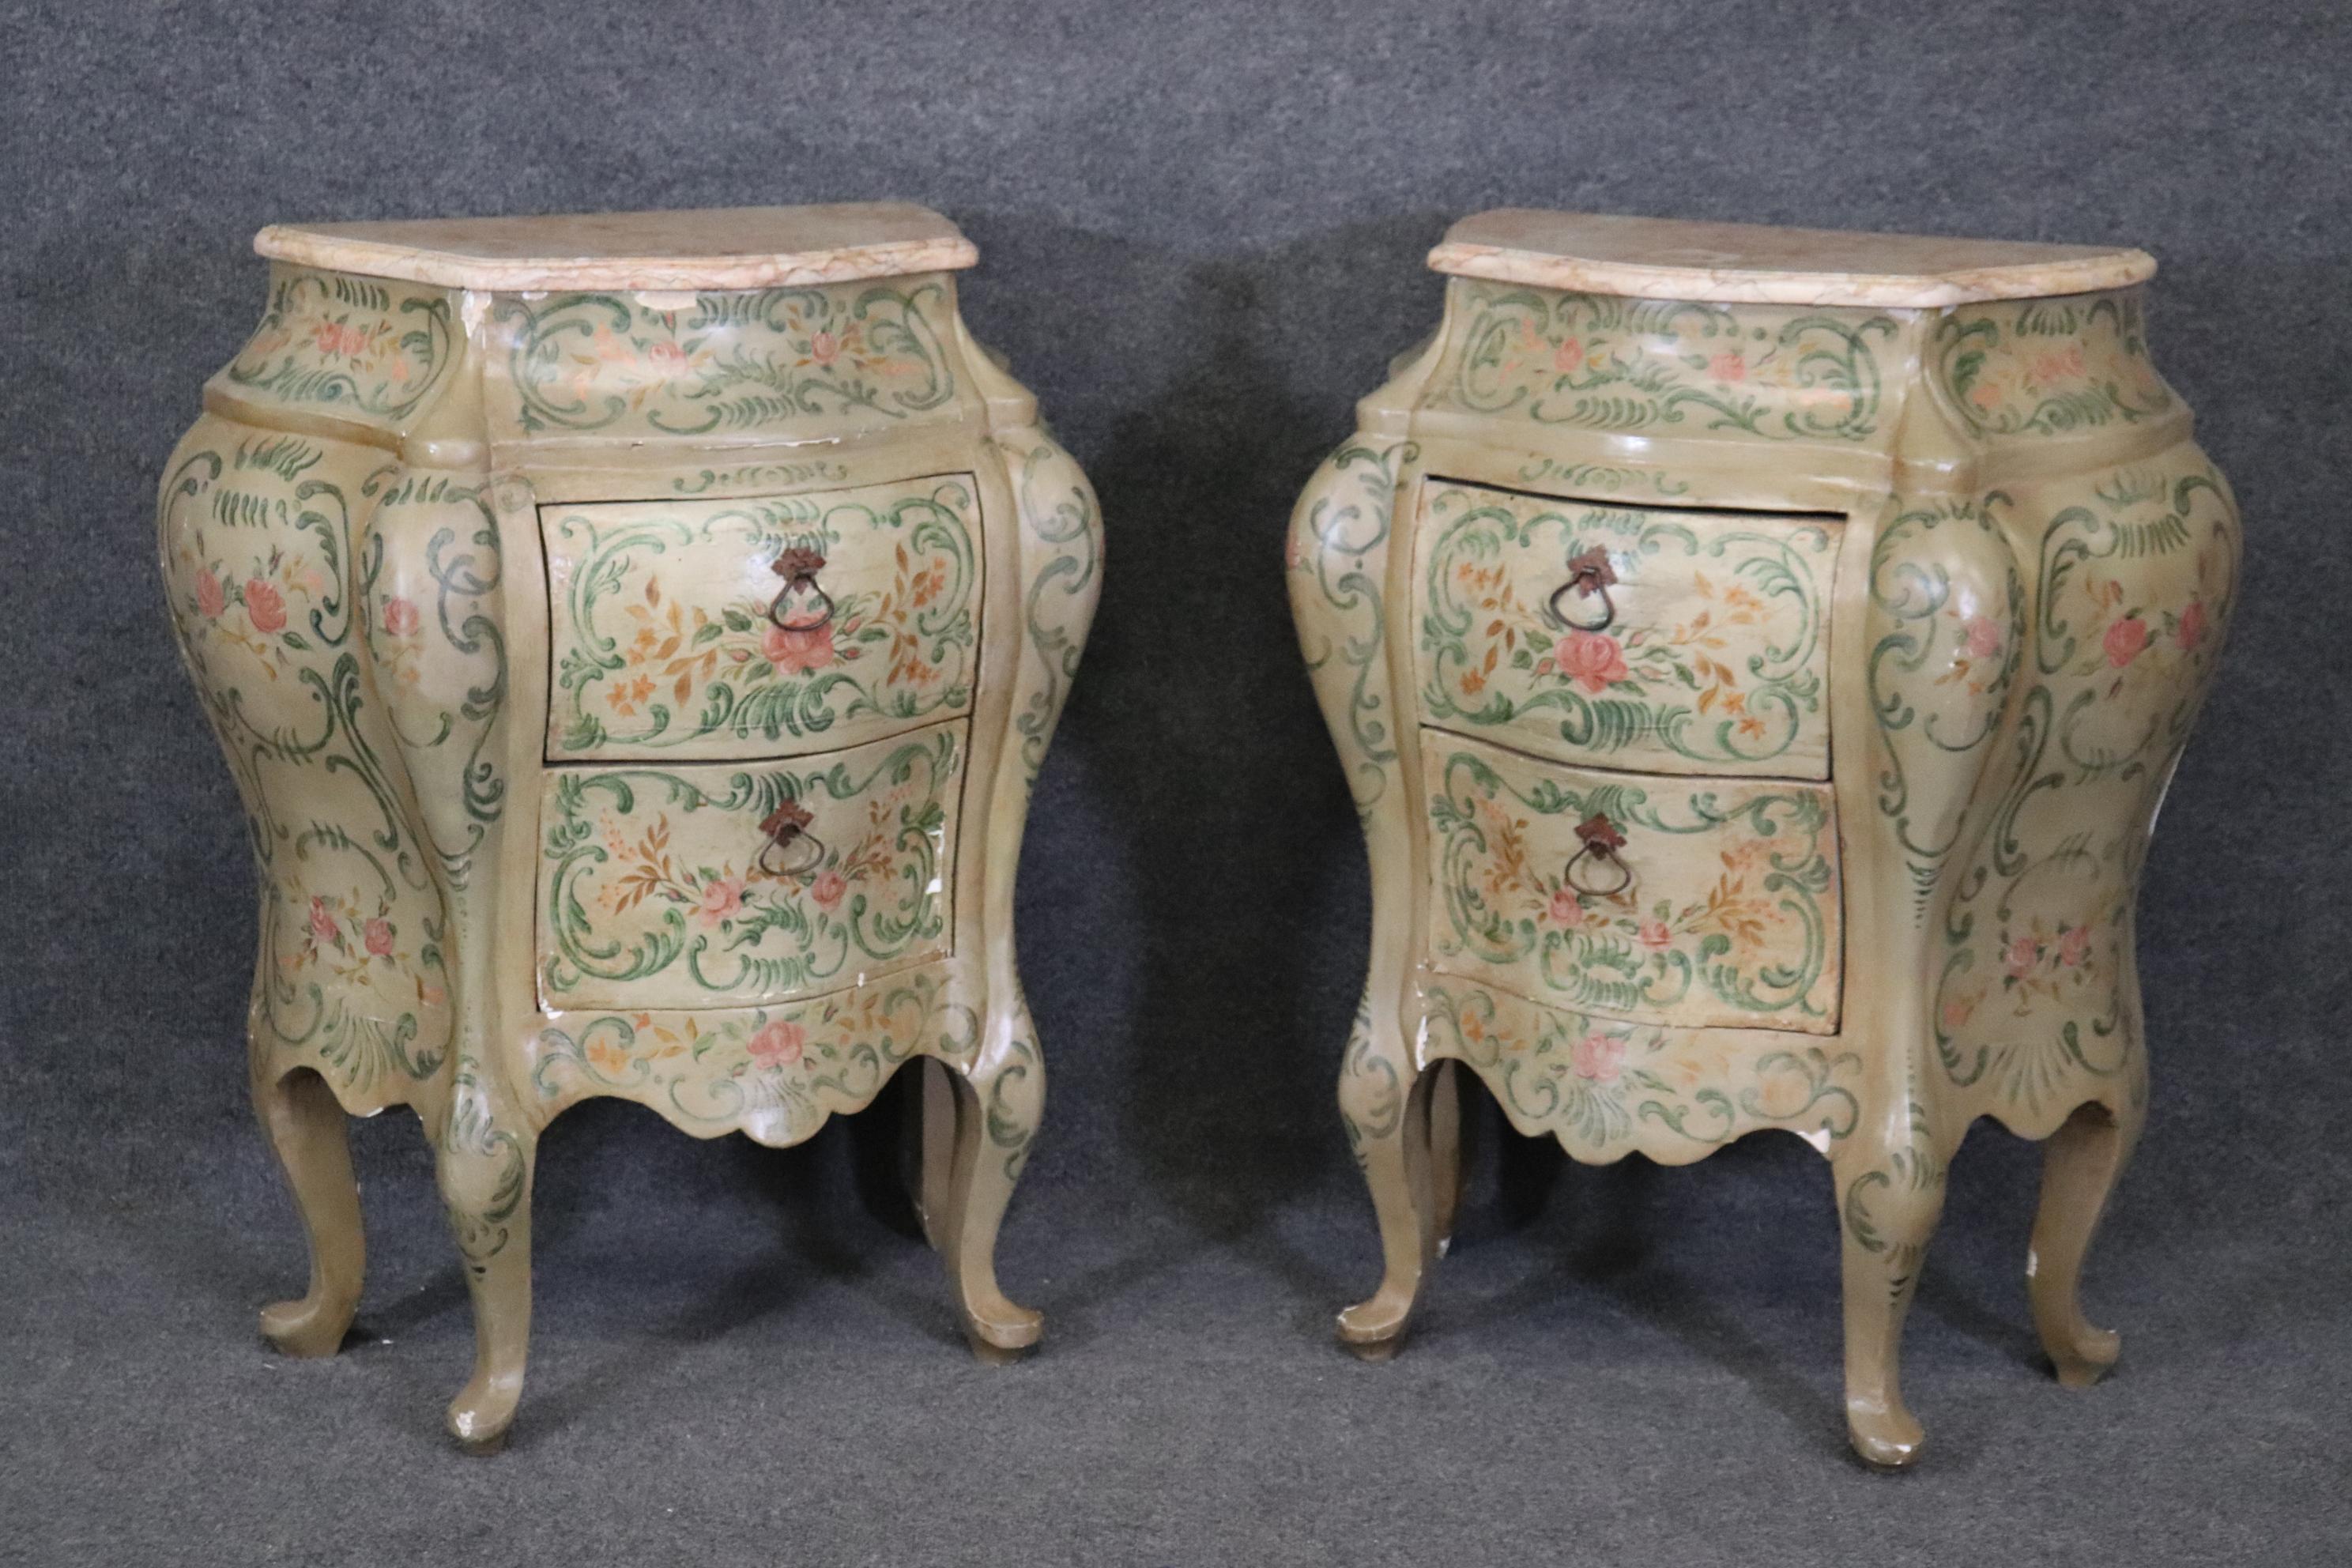 This is an extremely rare pair of original hand-painted Venetian paint decorated pair of nightstands. They are in good condition with some minor finish as to be expected for their advanced age. The stands are in good condition and they have a pair